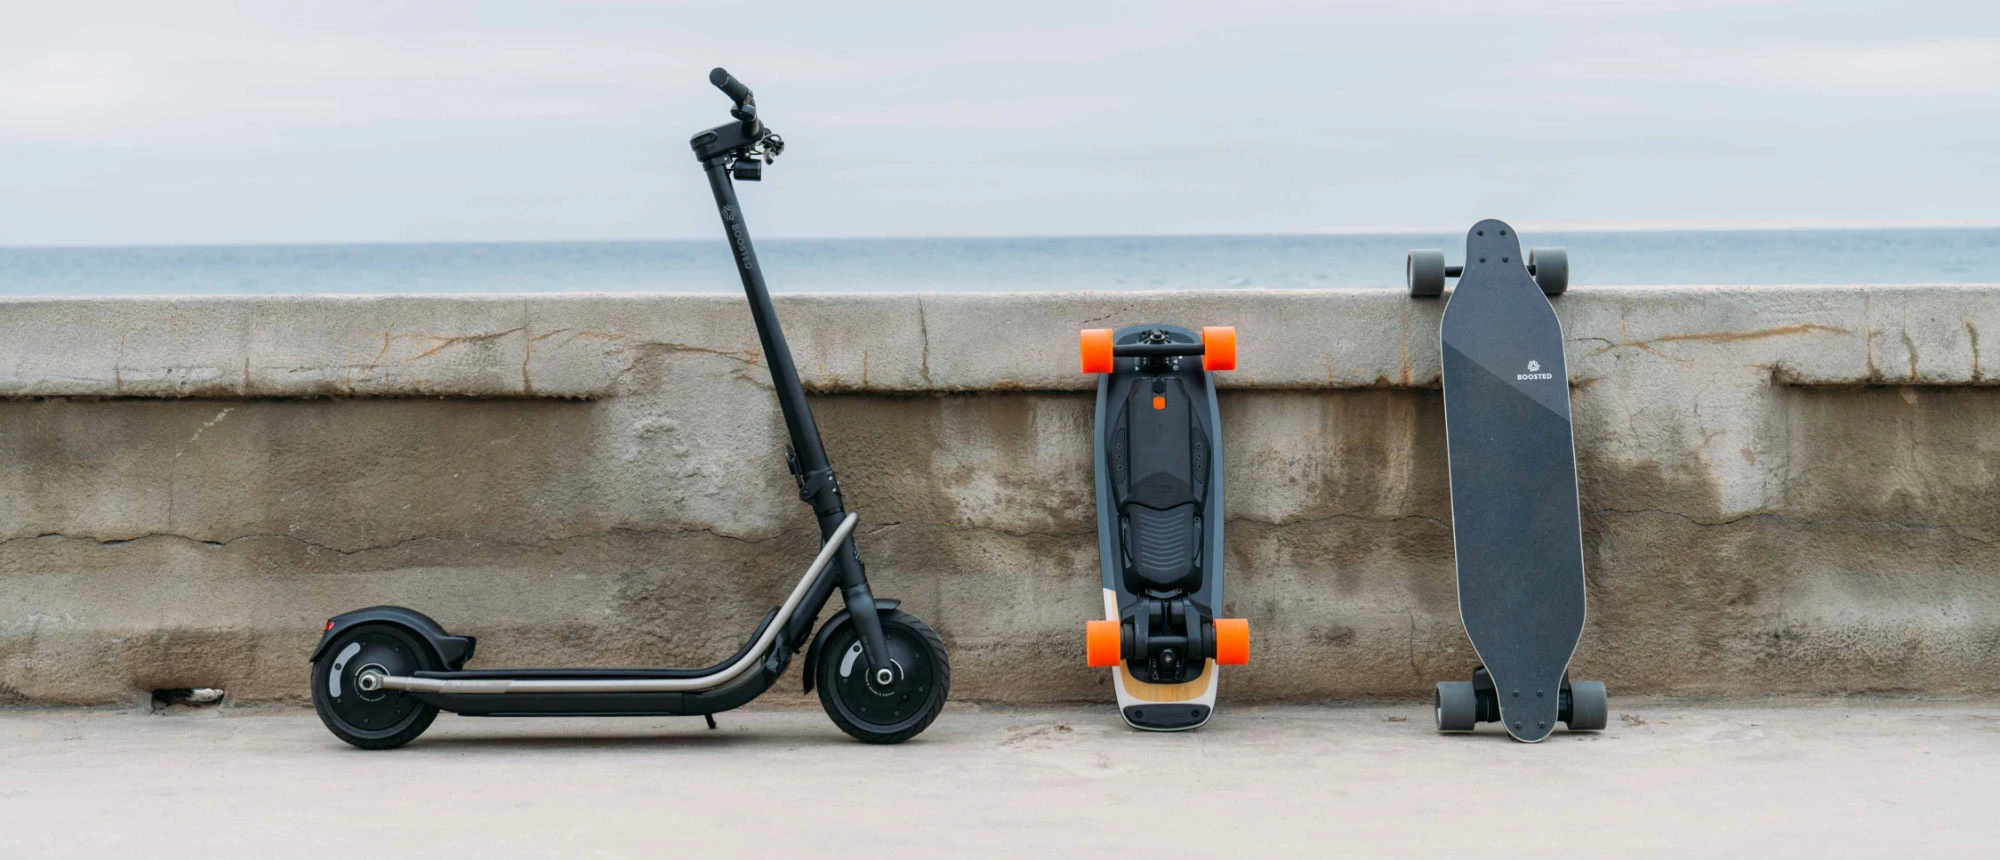 boosted main visual image about skateboards, electric boards